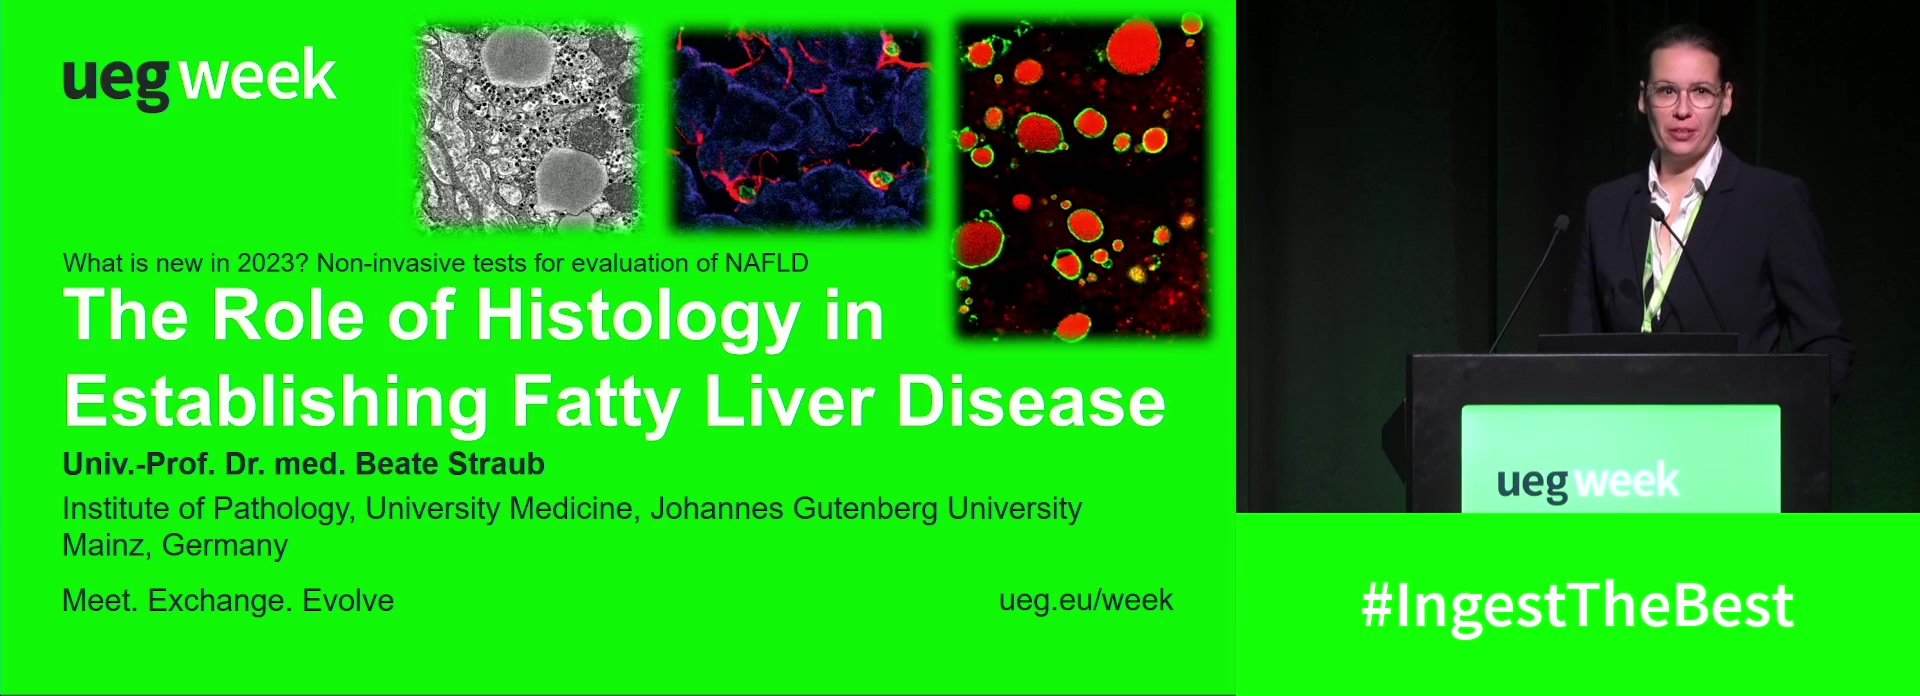 The role of liver histology in establishing fatty liver disease